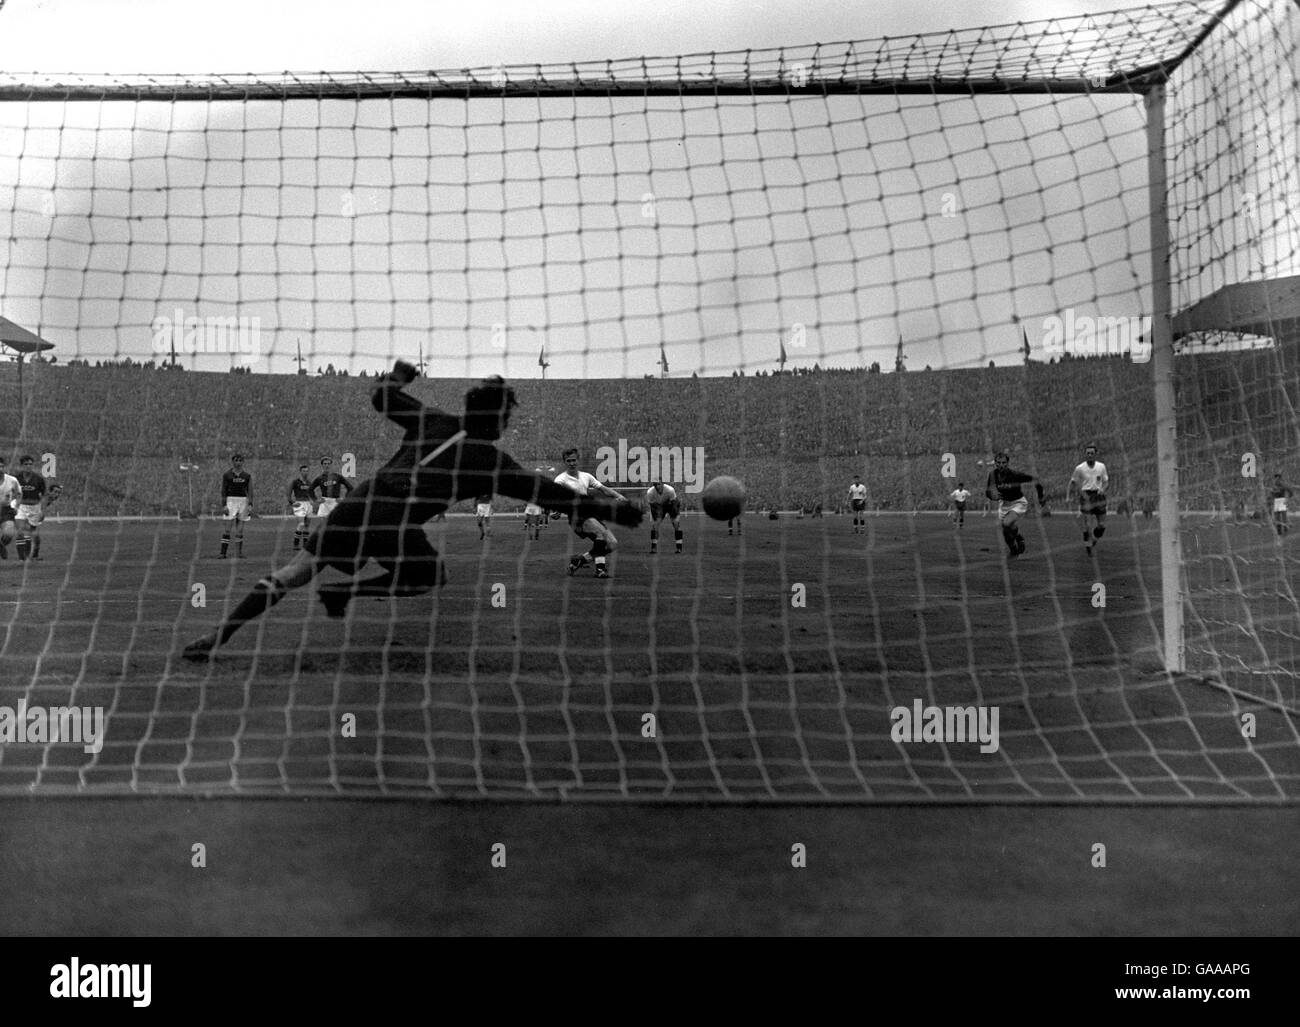 Soccer - Friendly - England v USSR. Bobby Charlton beats Russian goalkeeper Vladimir Belyayev with a penalty shot to give England another goal. Stock Photo